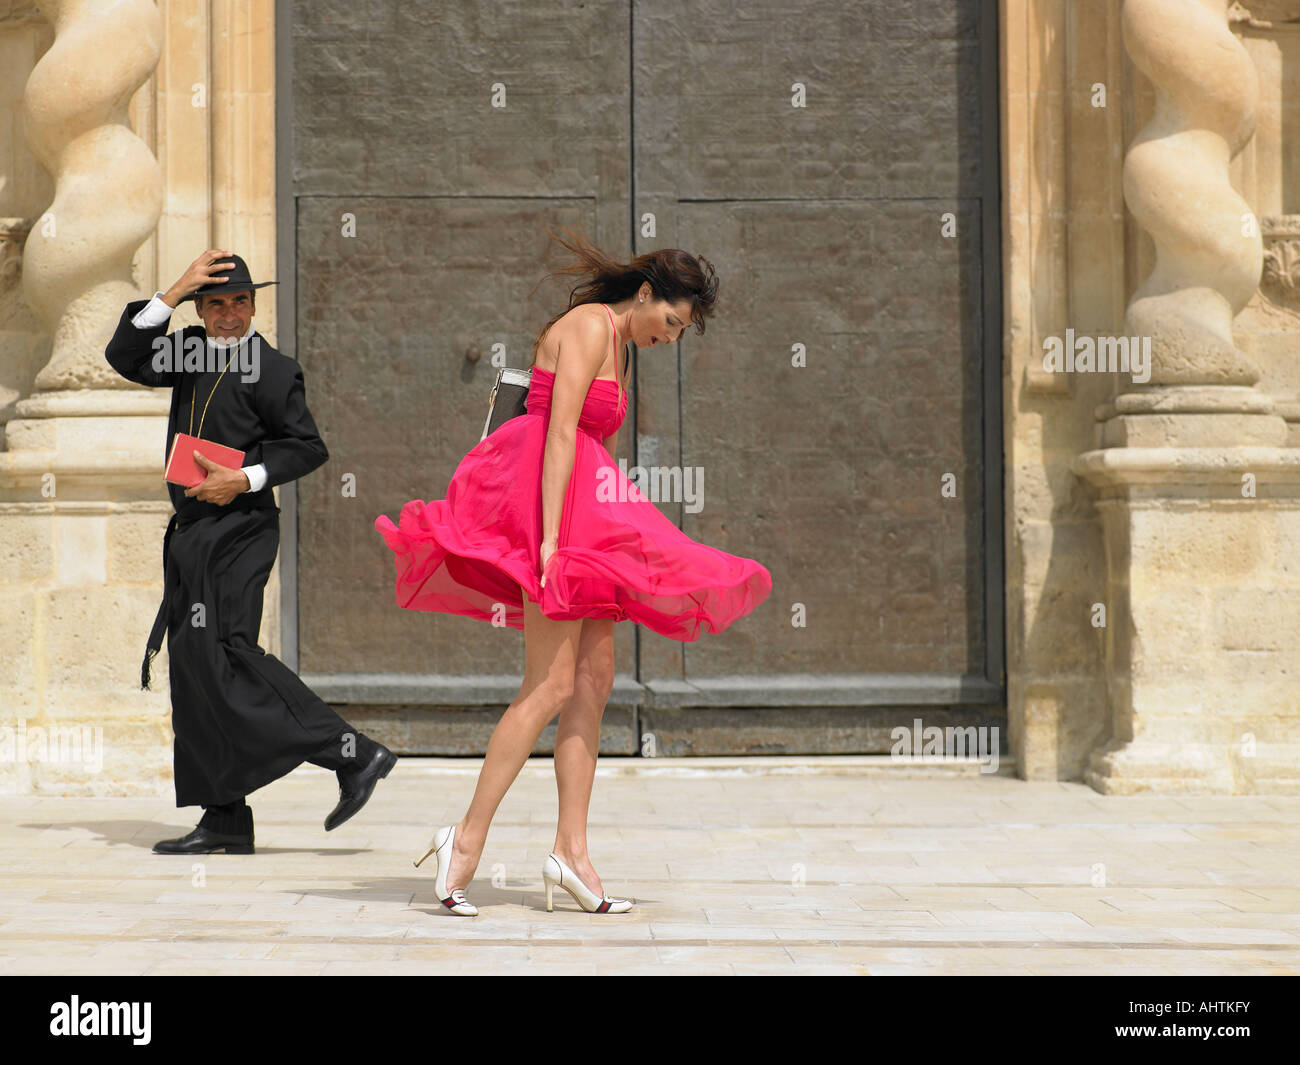 http://c8.alamy.com/comp/AHTKFY/priest-passing-woman-whose-skirt-is-blowing-up-in-the-wind-alicante-AHTKFY.jpg